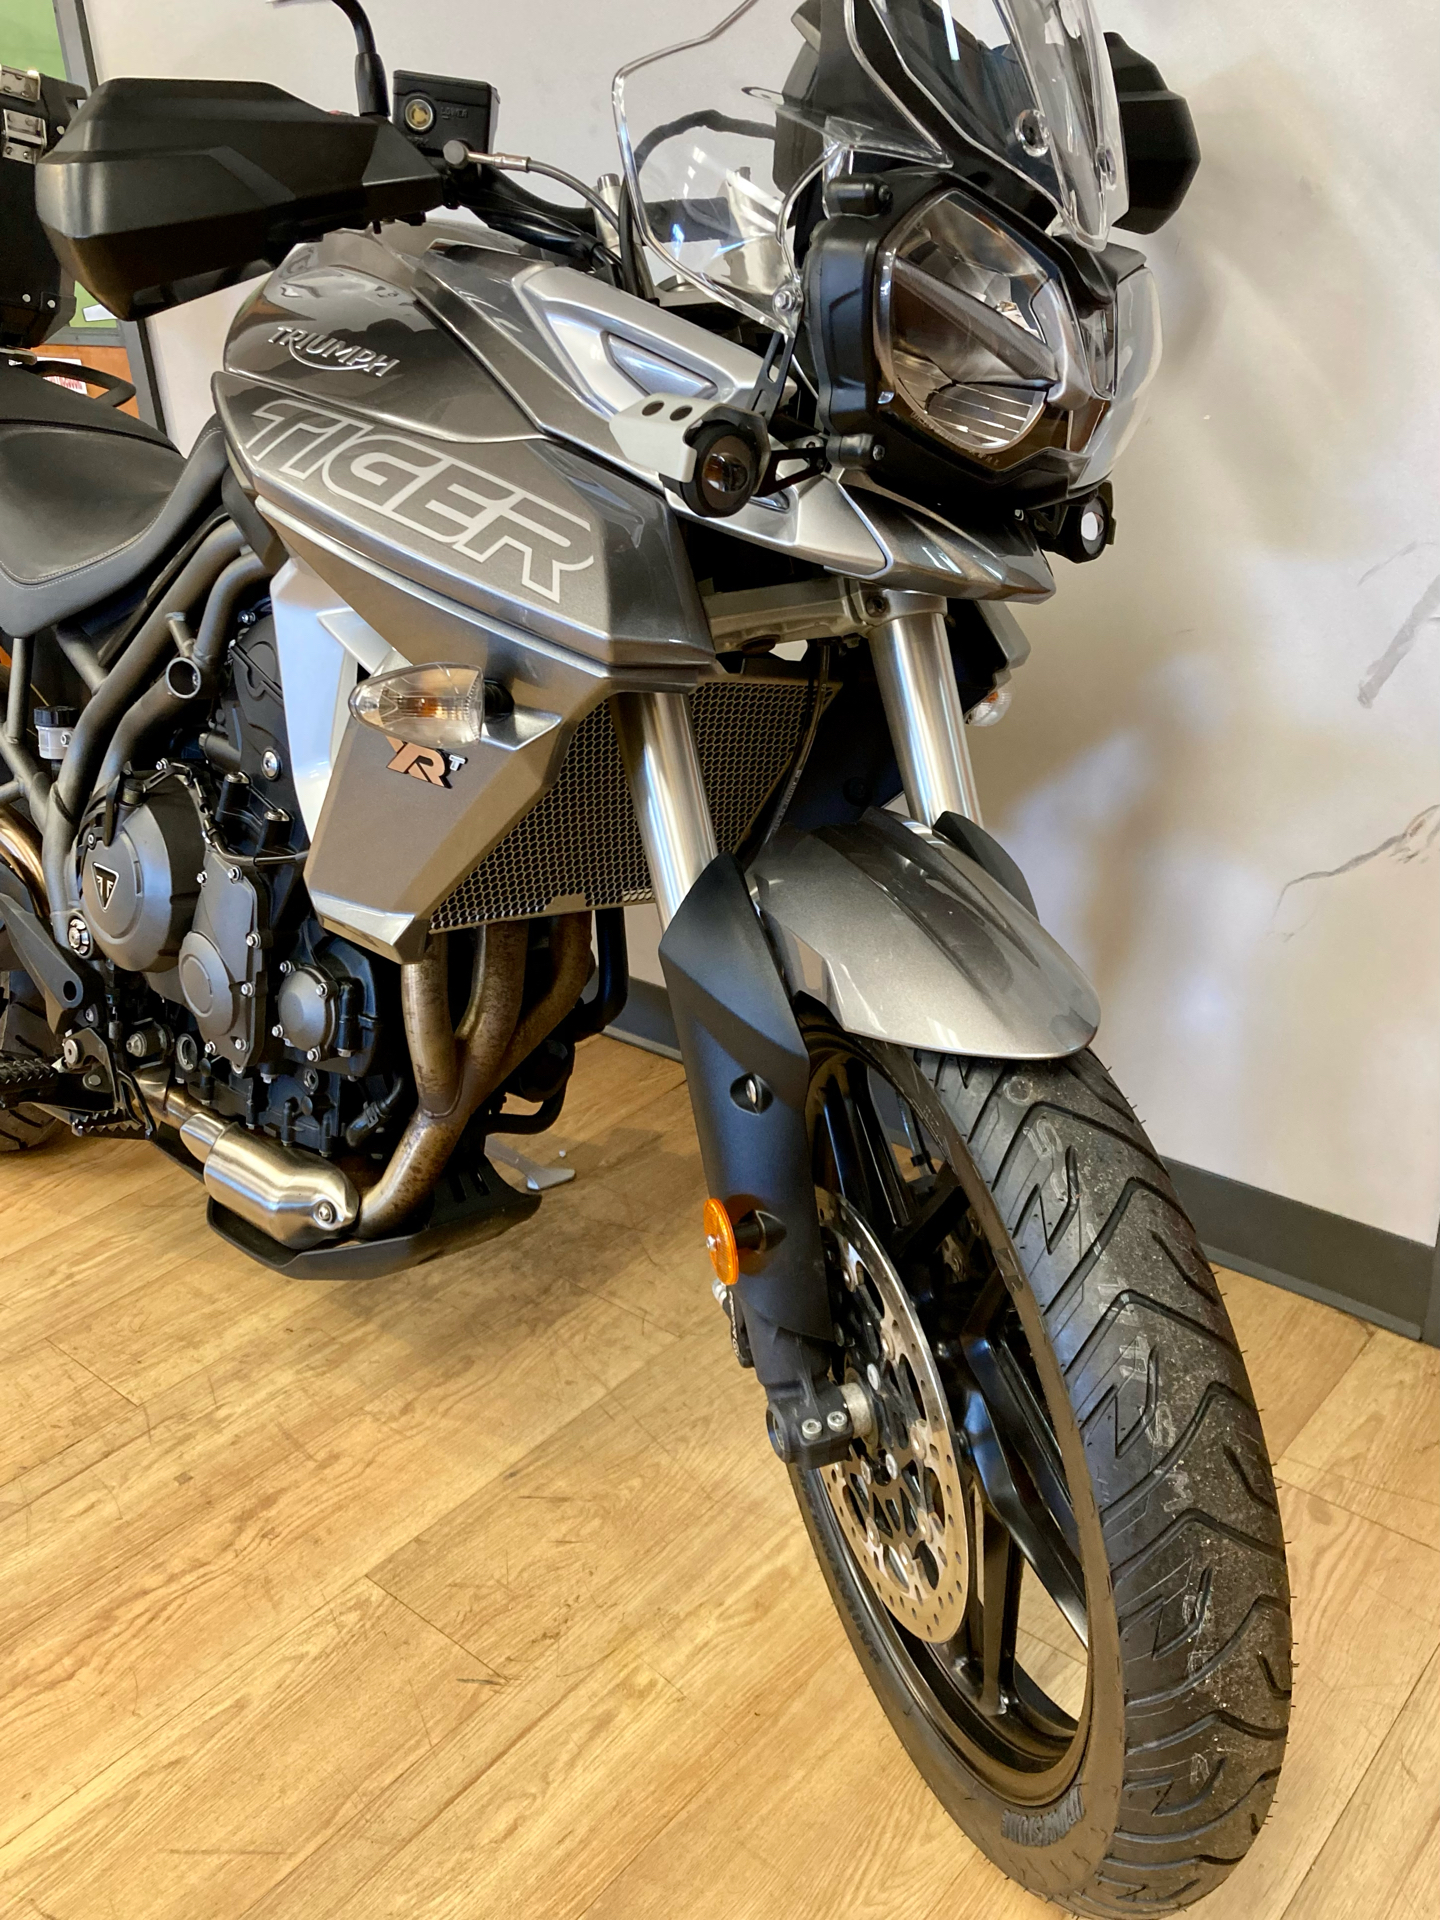 2018 Triumph Tiger 800 XRt in Mahwah, New Jersey - Photo 8